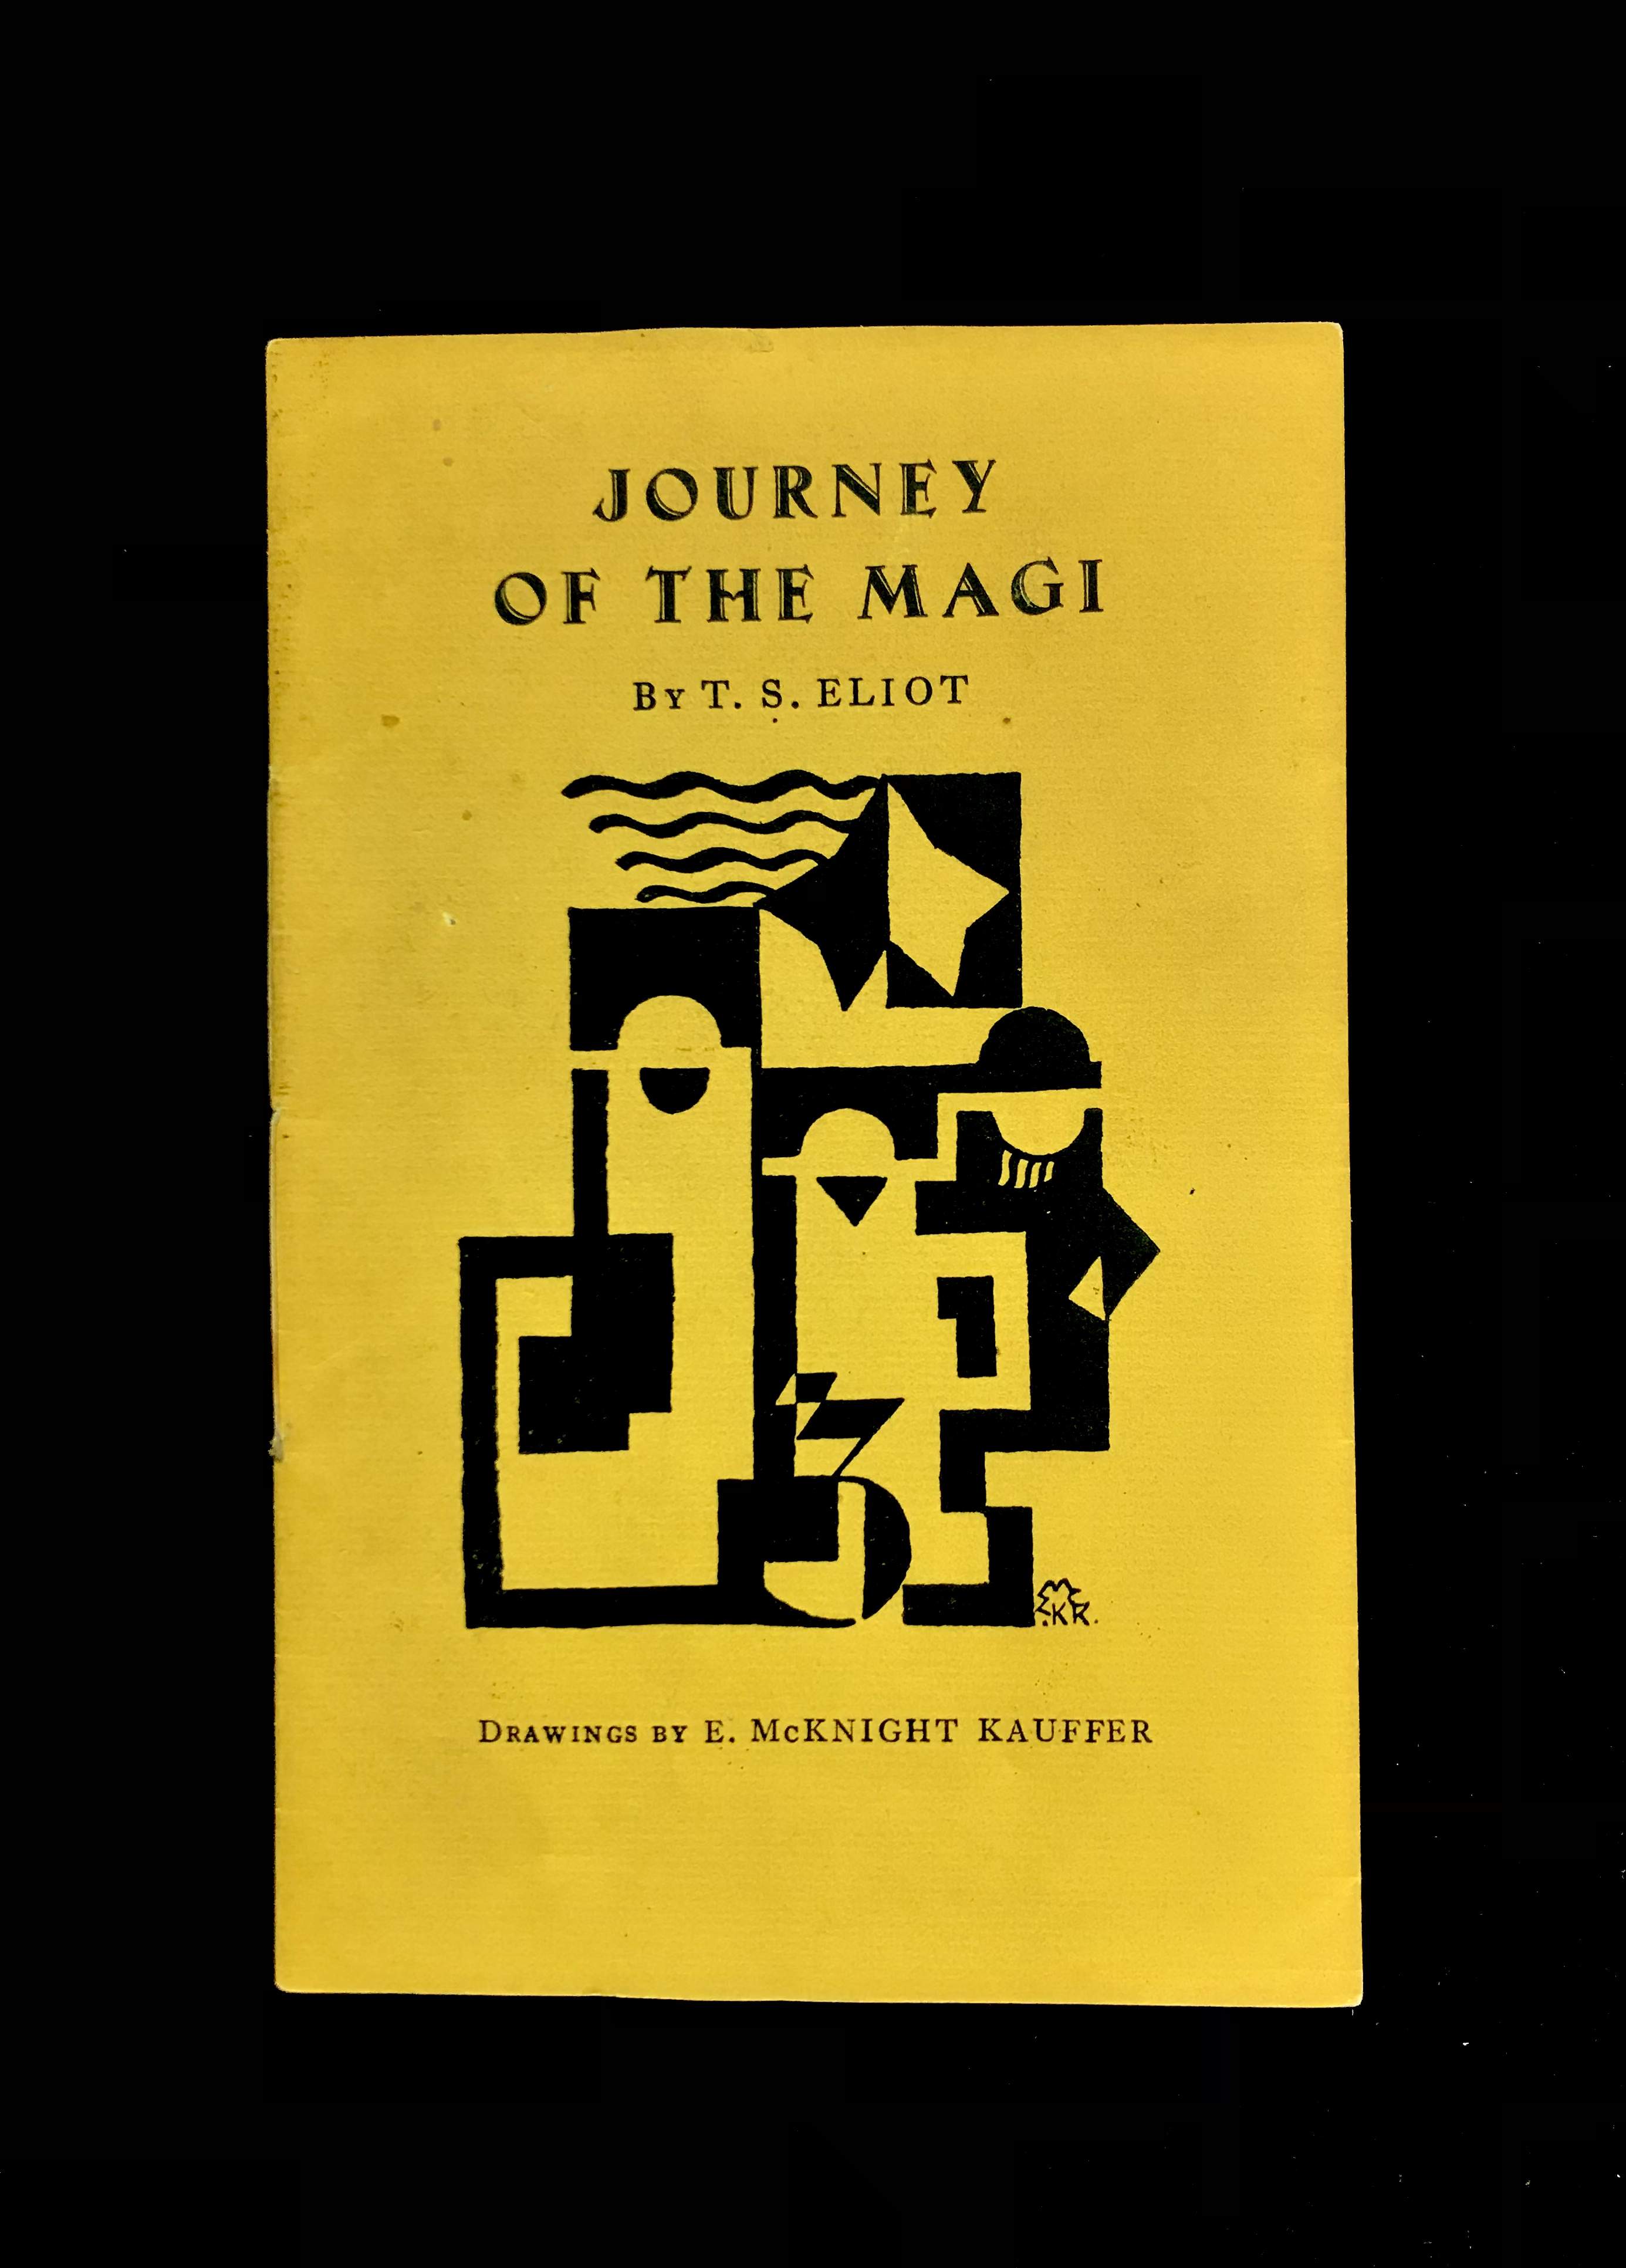 Journey Of The Magi by T. S. Eliot